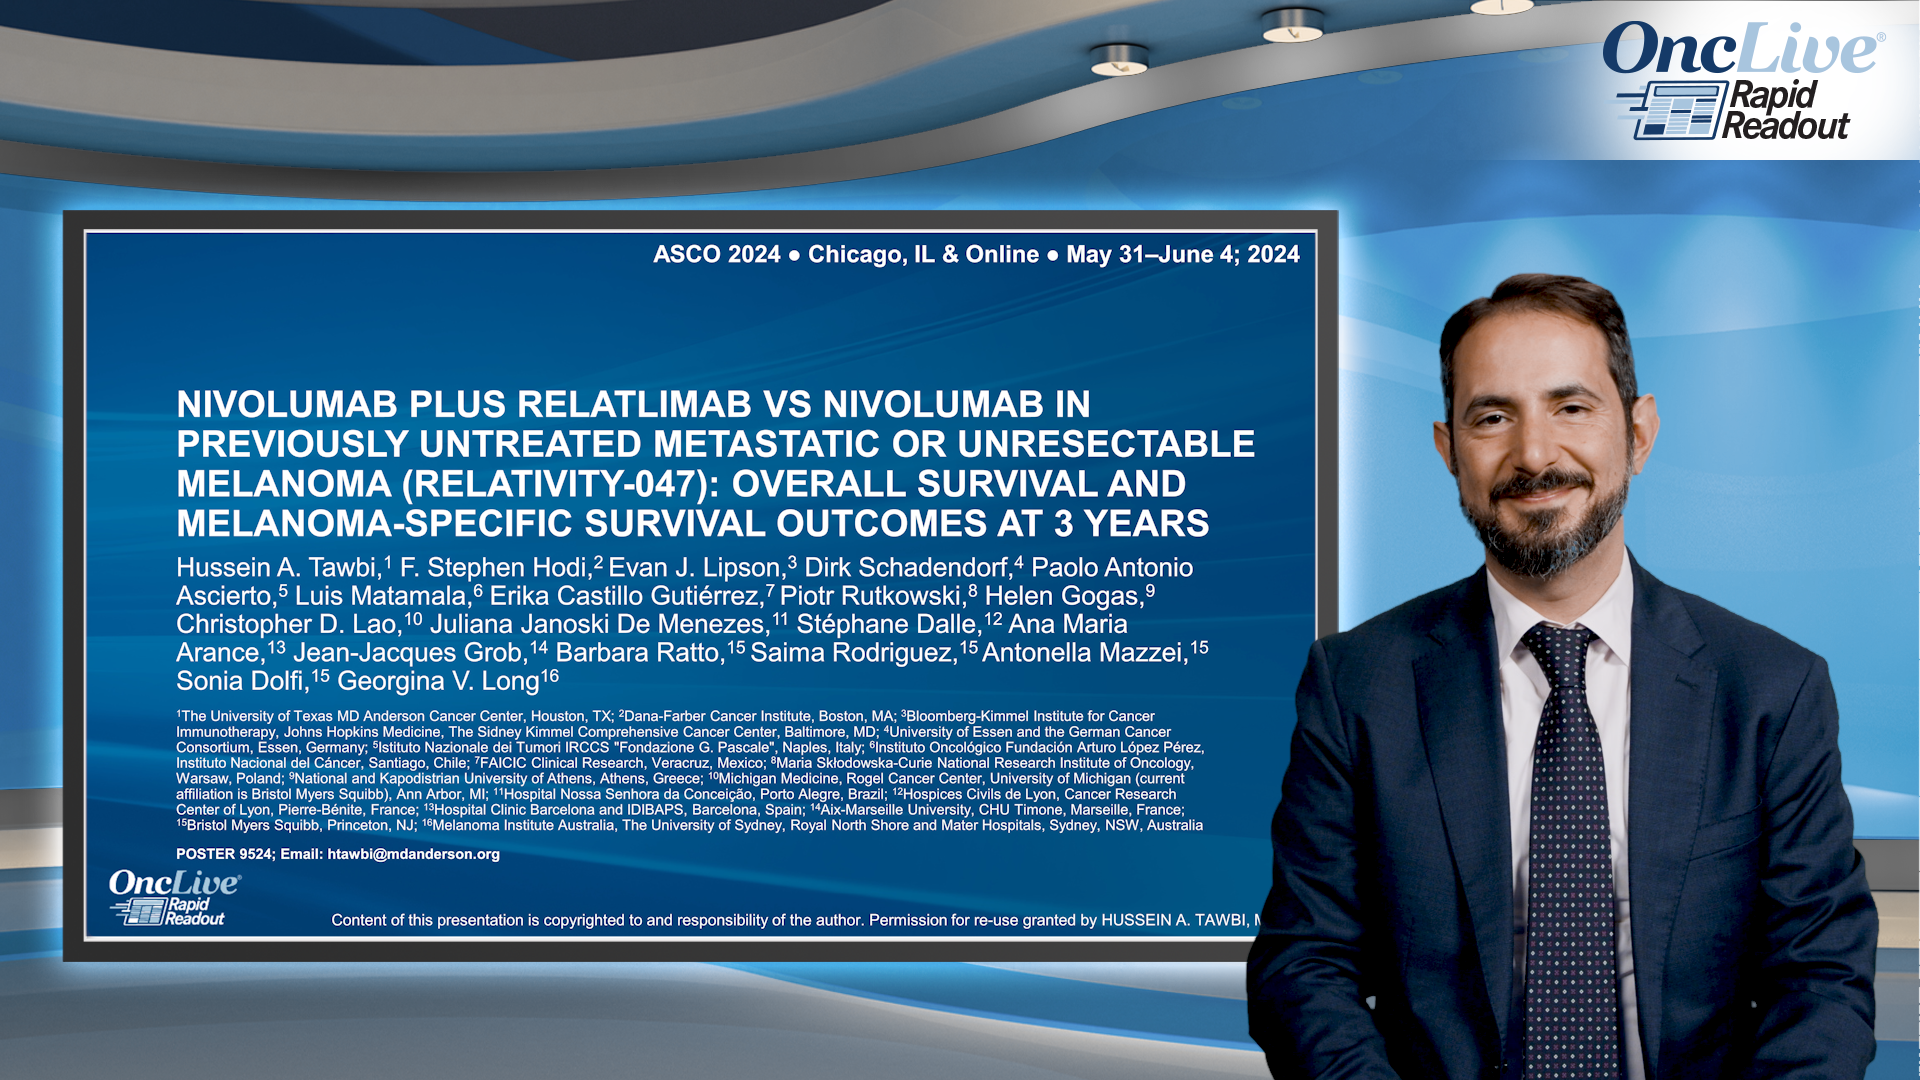 Nivolumab plus relatlimab vs nivolumab in previously untreated metastatic or unresectable melanoma (RELATIVITY-047): overall survival and melanoma-specific survival outcomes at 3 years